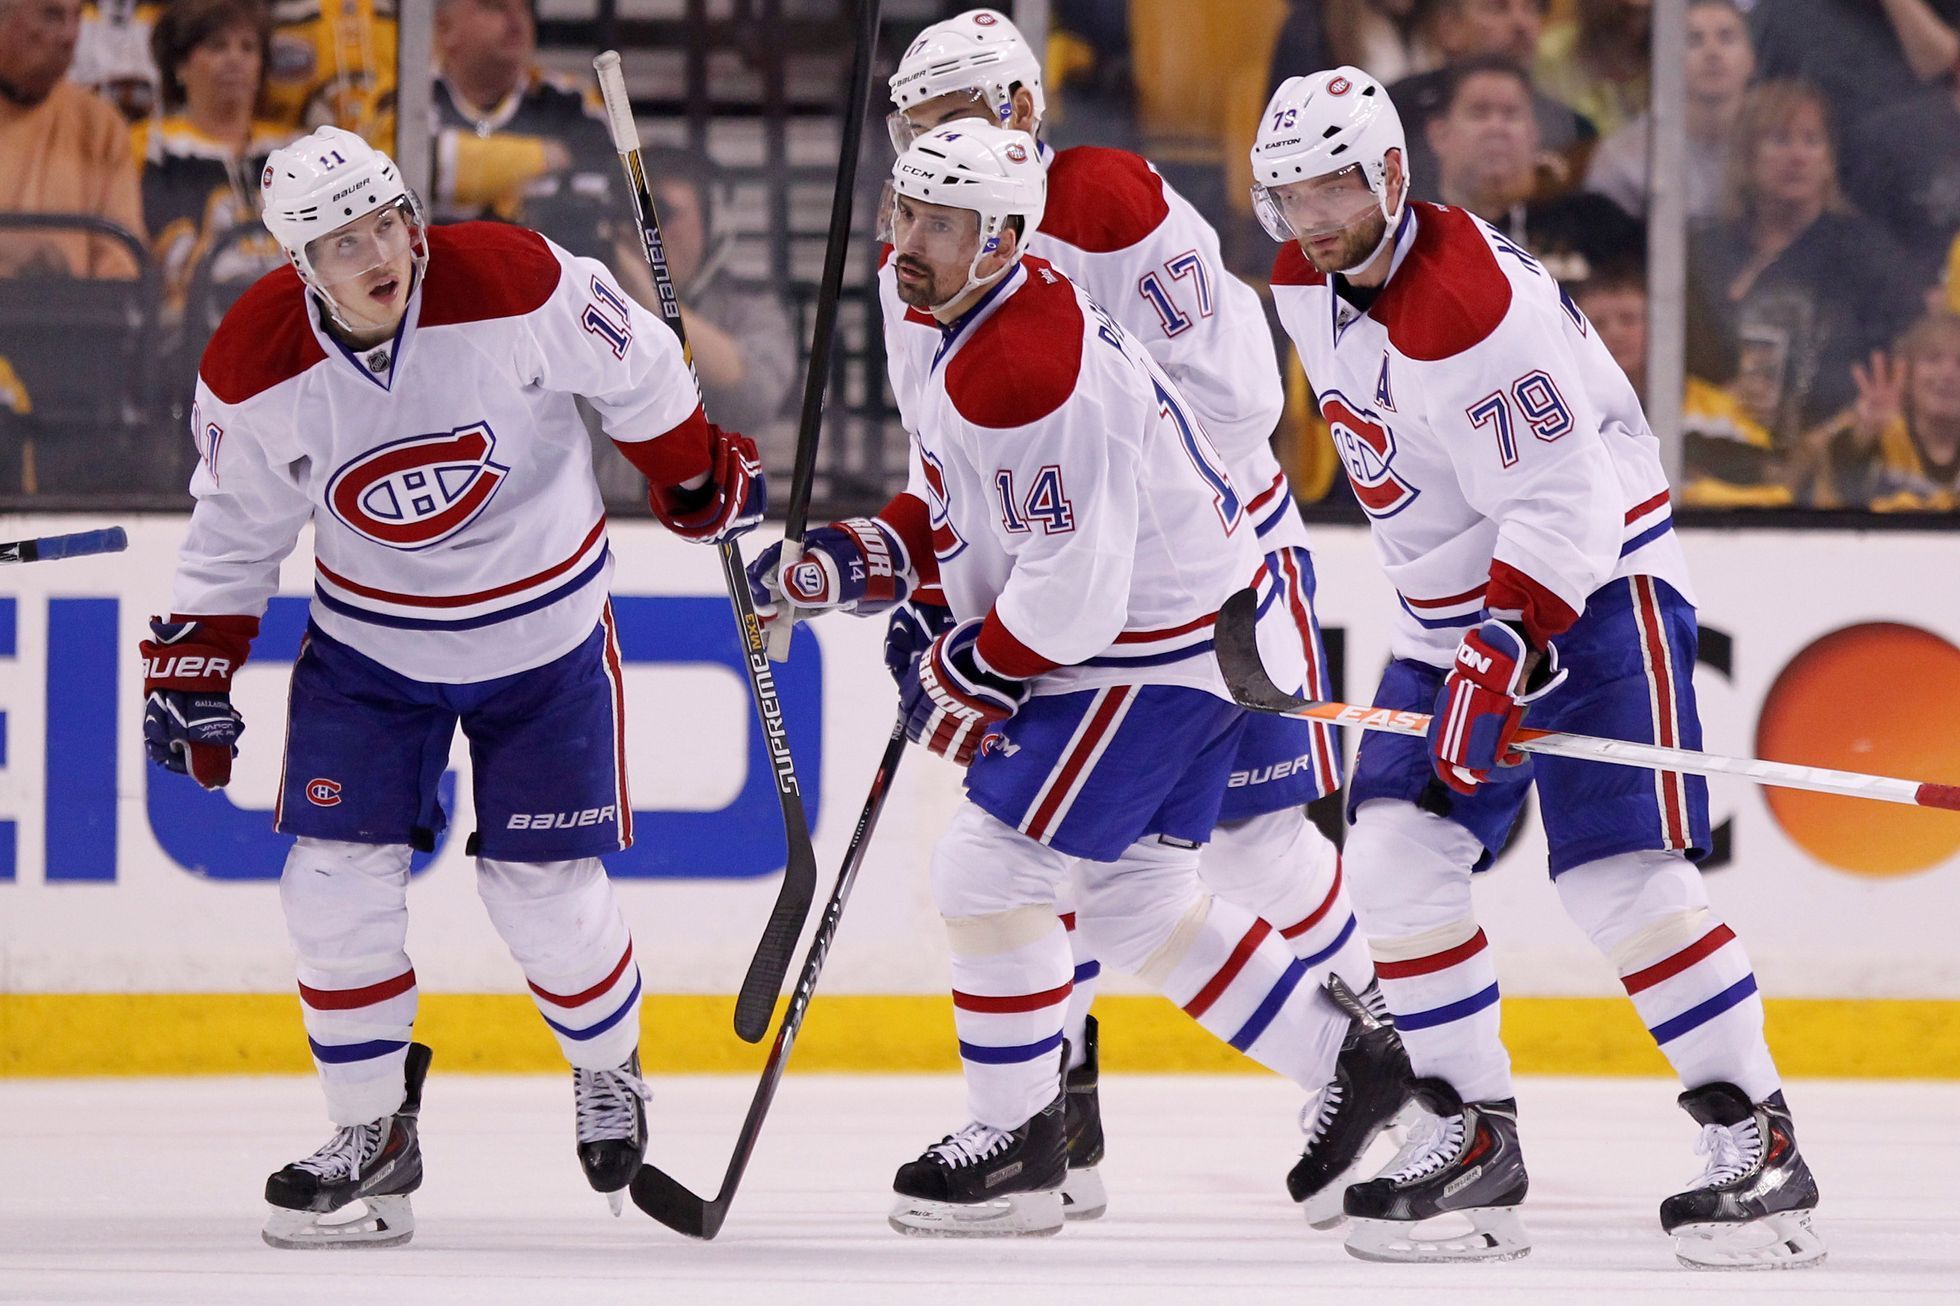 NHL: Stanley Cup Playoffs-Montreal Canadiens at Boston Bruins (Plekanec)